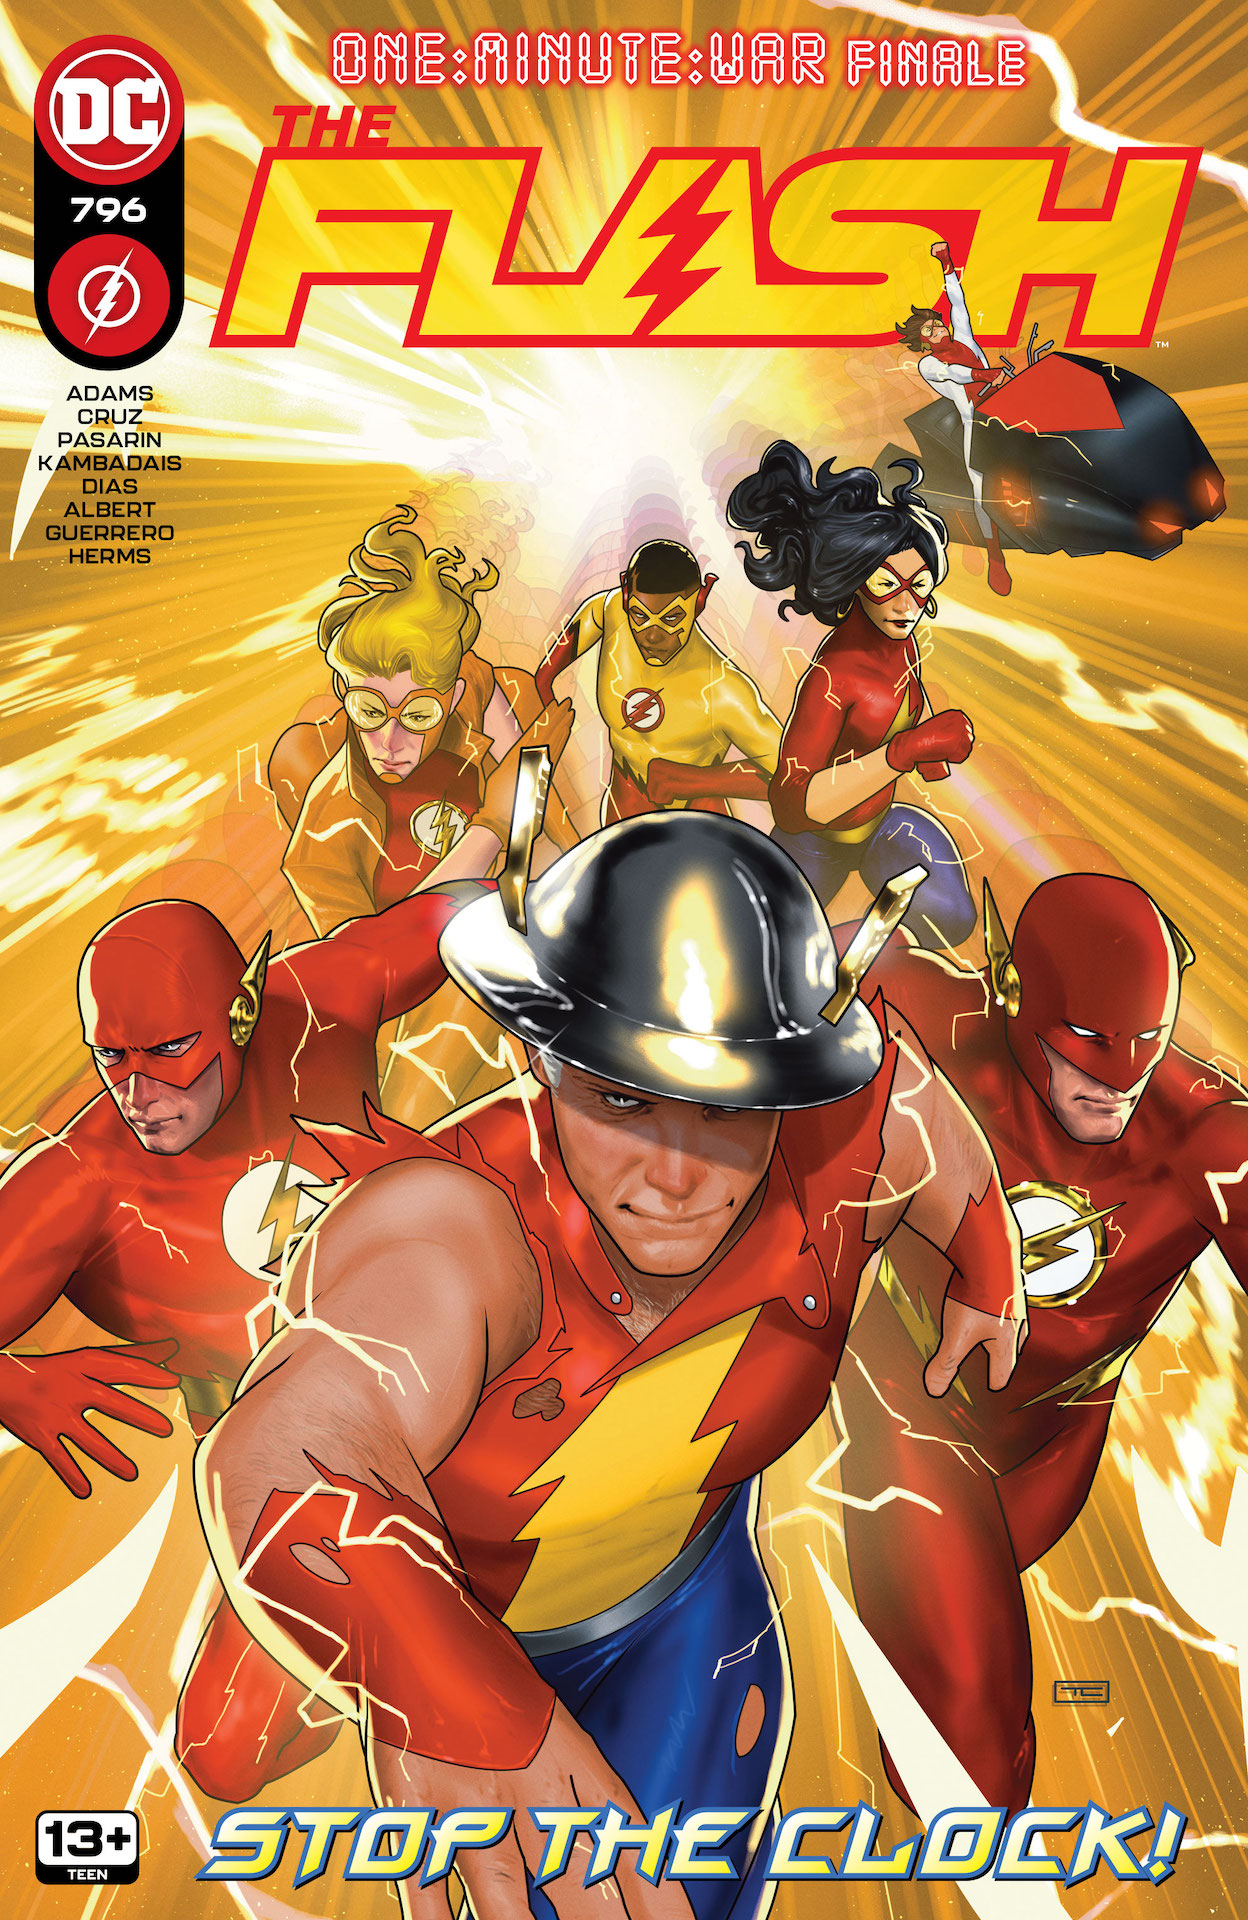 DC Preview: The Flash #796